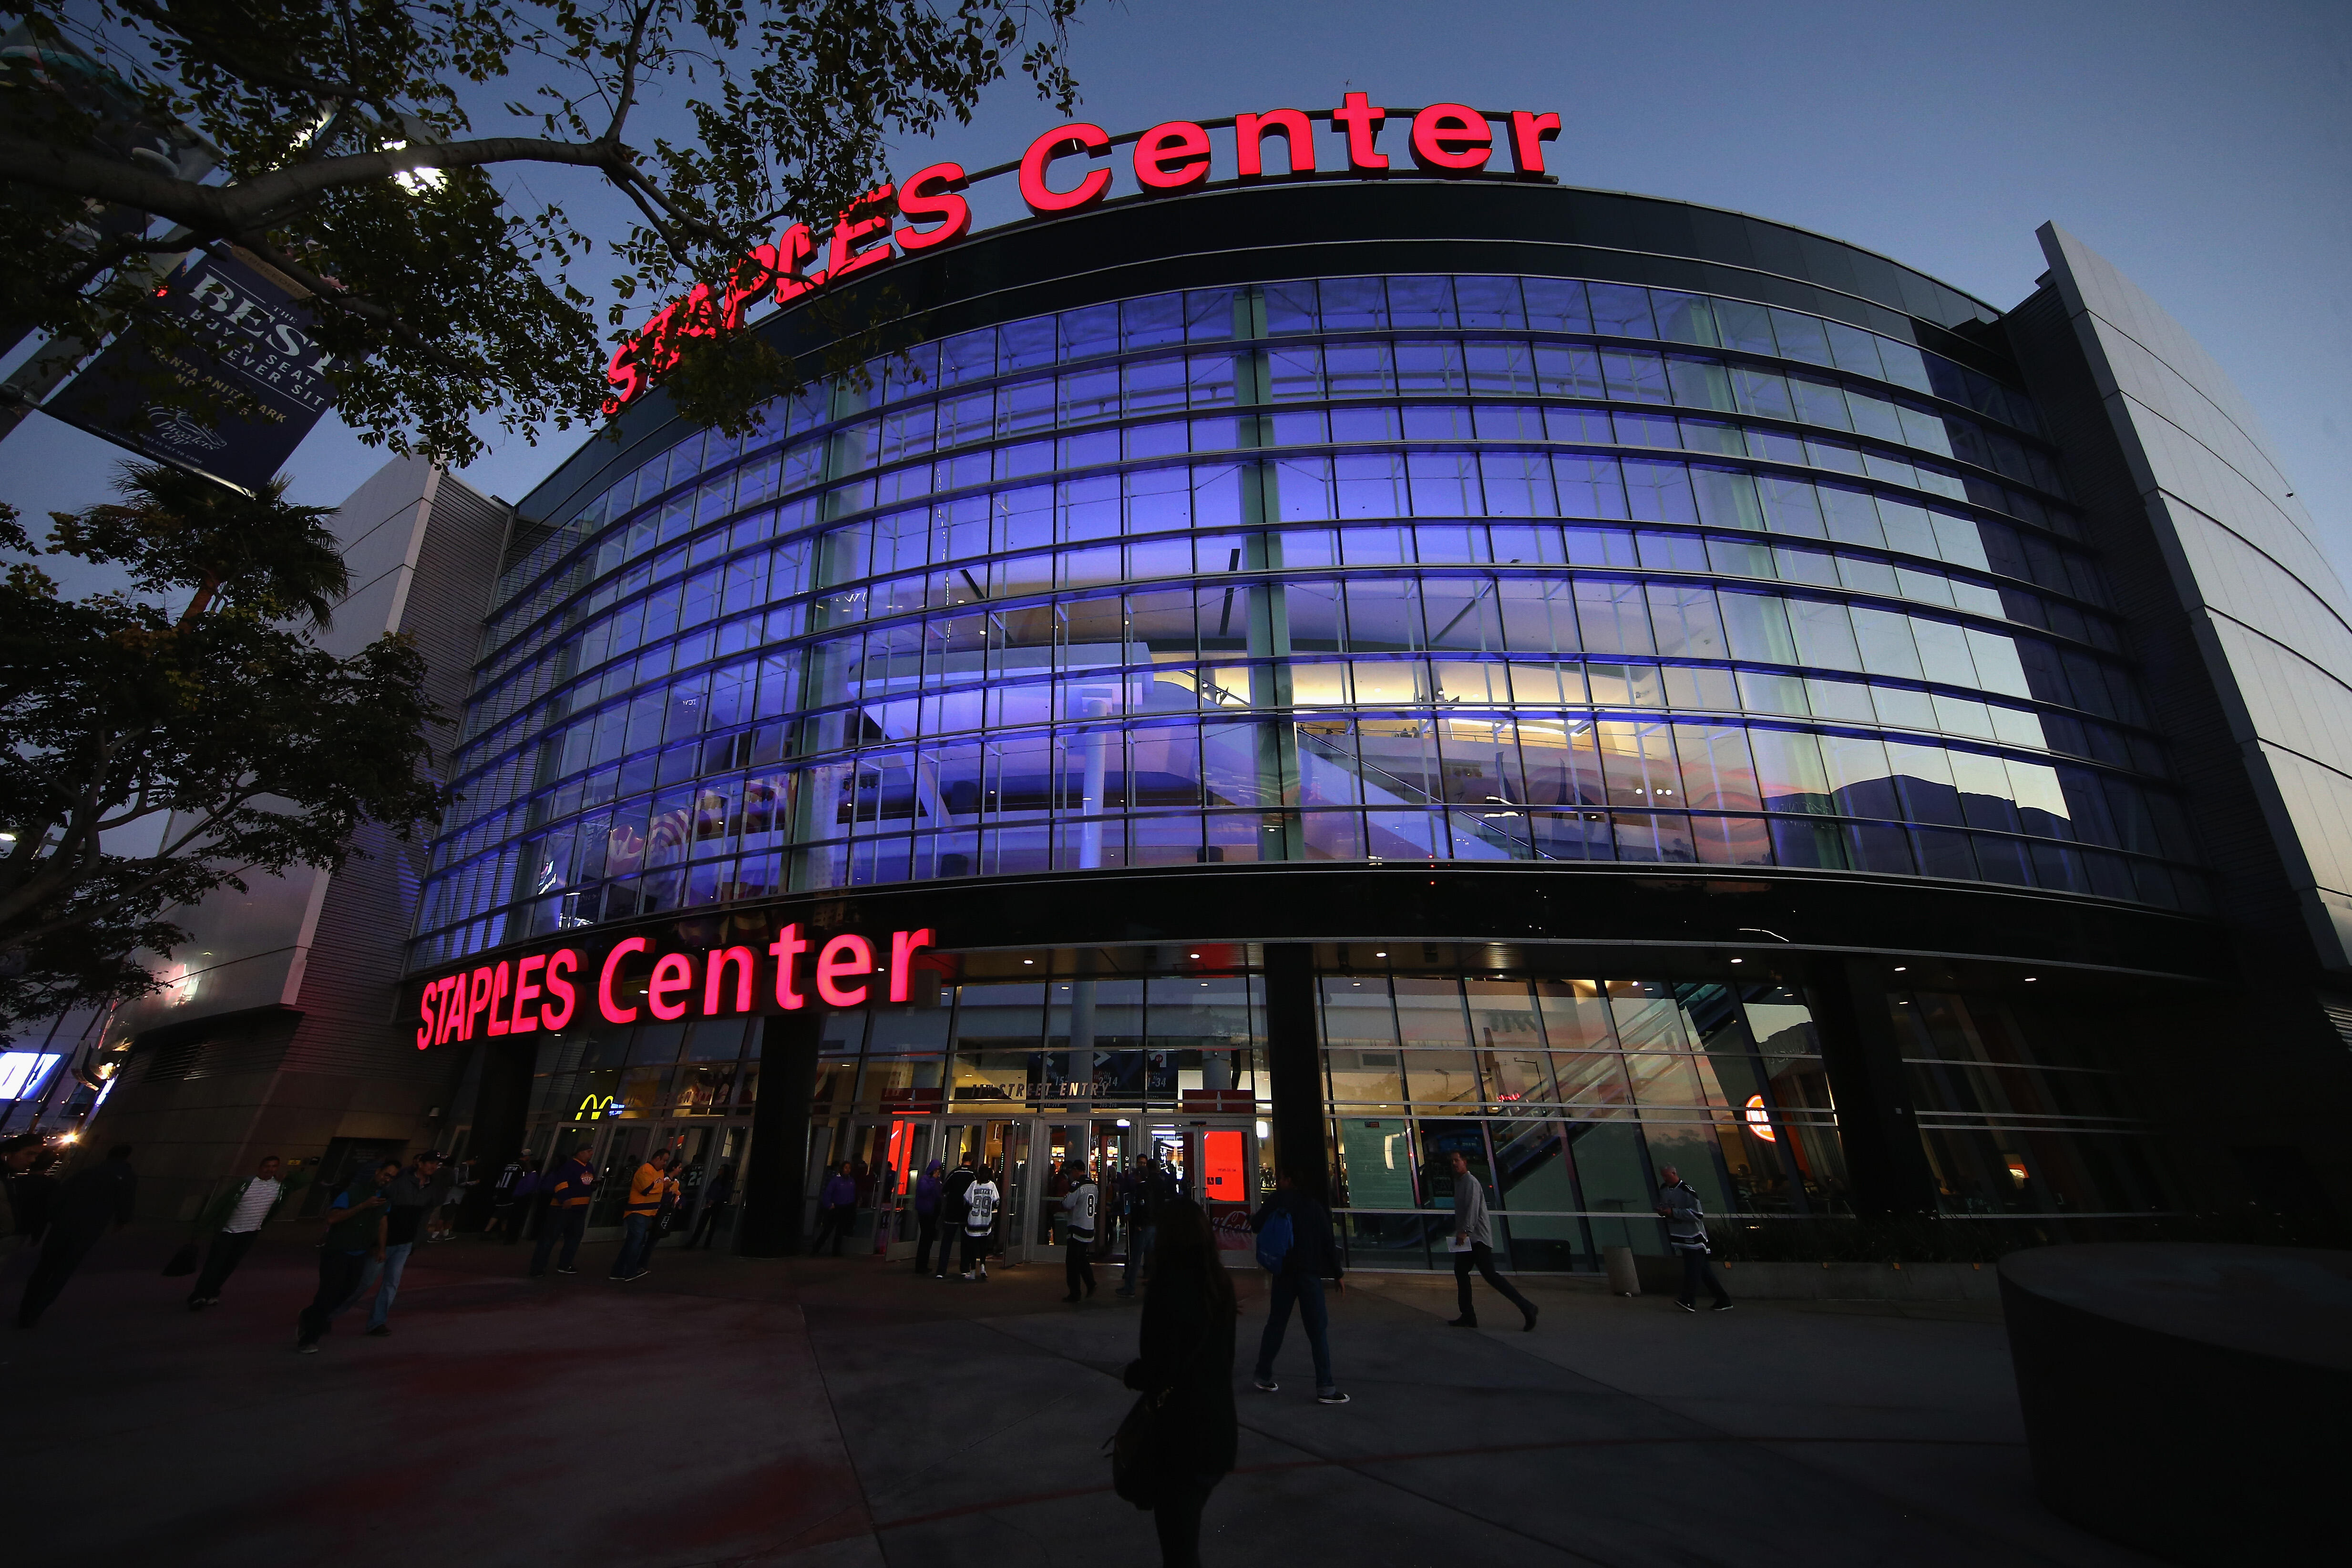 LOS ANGELES, CA - OCTOBER 14:  An exterior view of Staples Center during prior to a game between the Los Angeles Kings and the Philadelphia Flyers  on October 14, 2016 in Los Angeles, California.  (Photo by Sean M. Haffey/Getty Images)